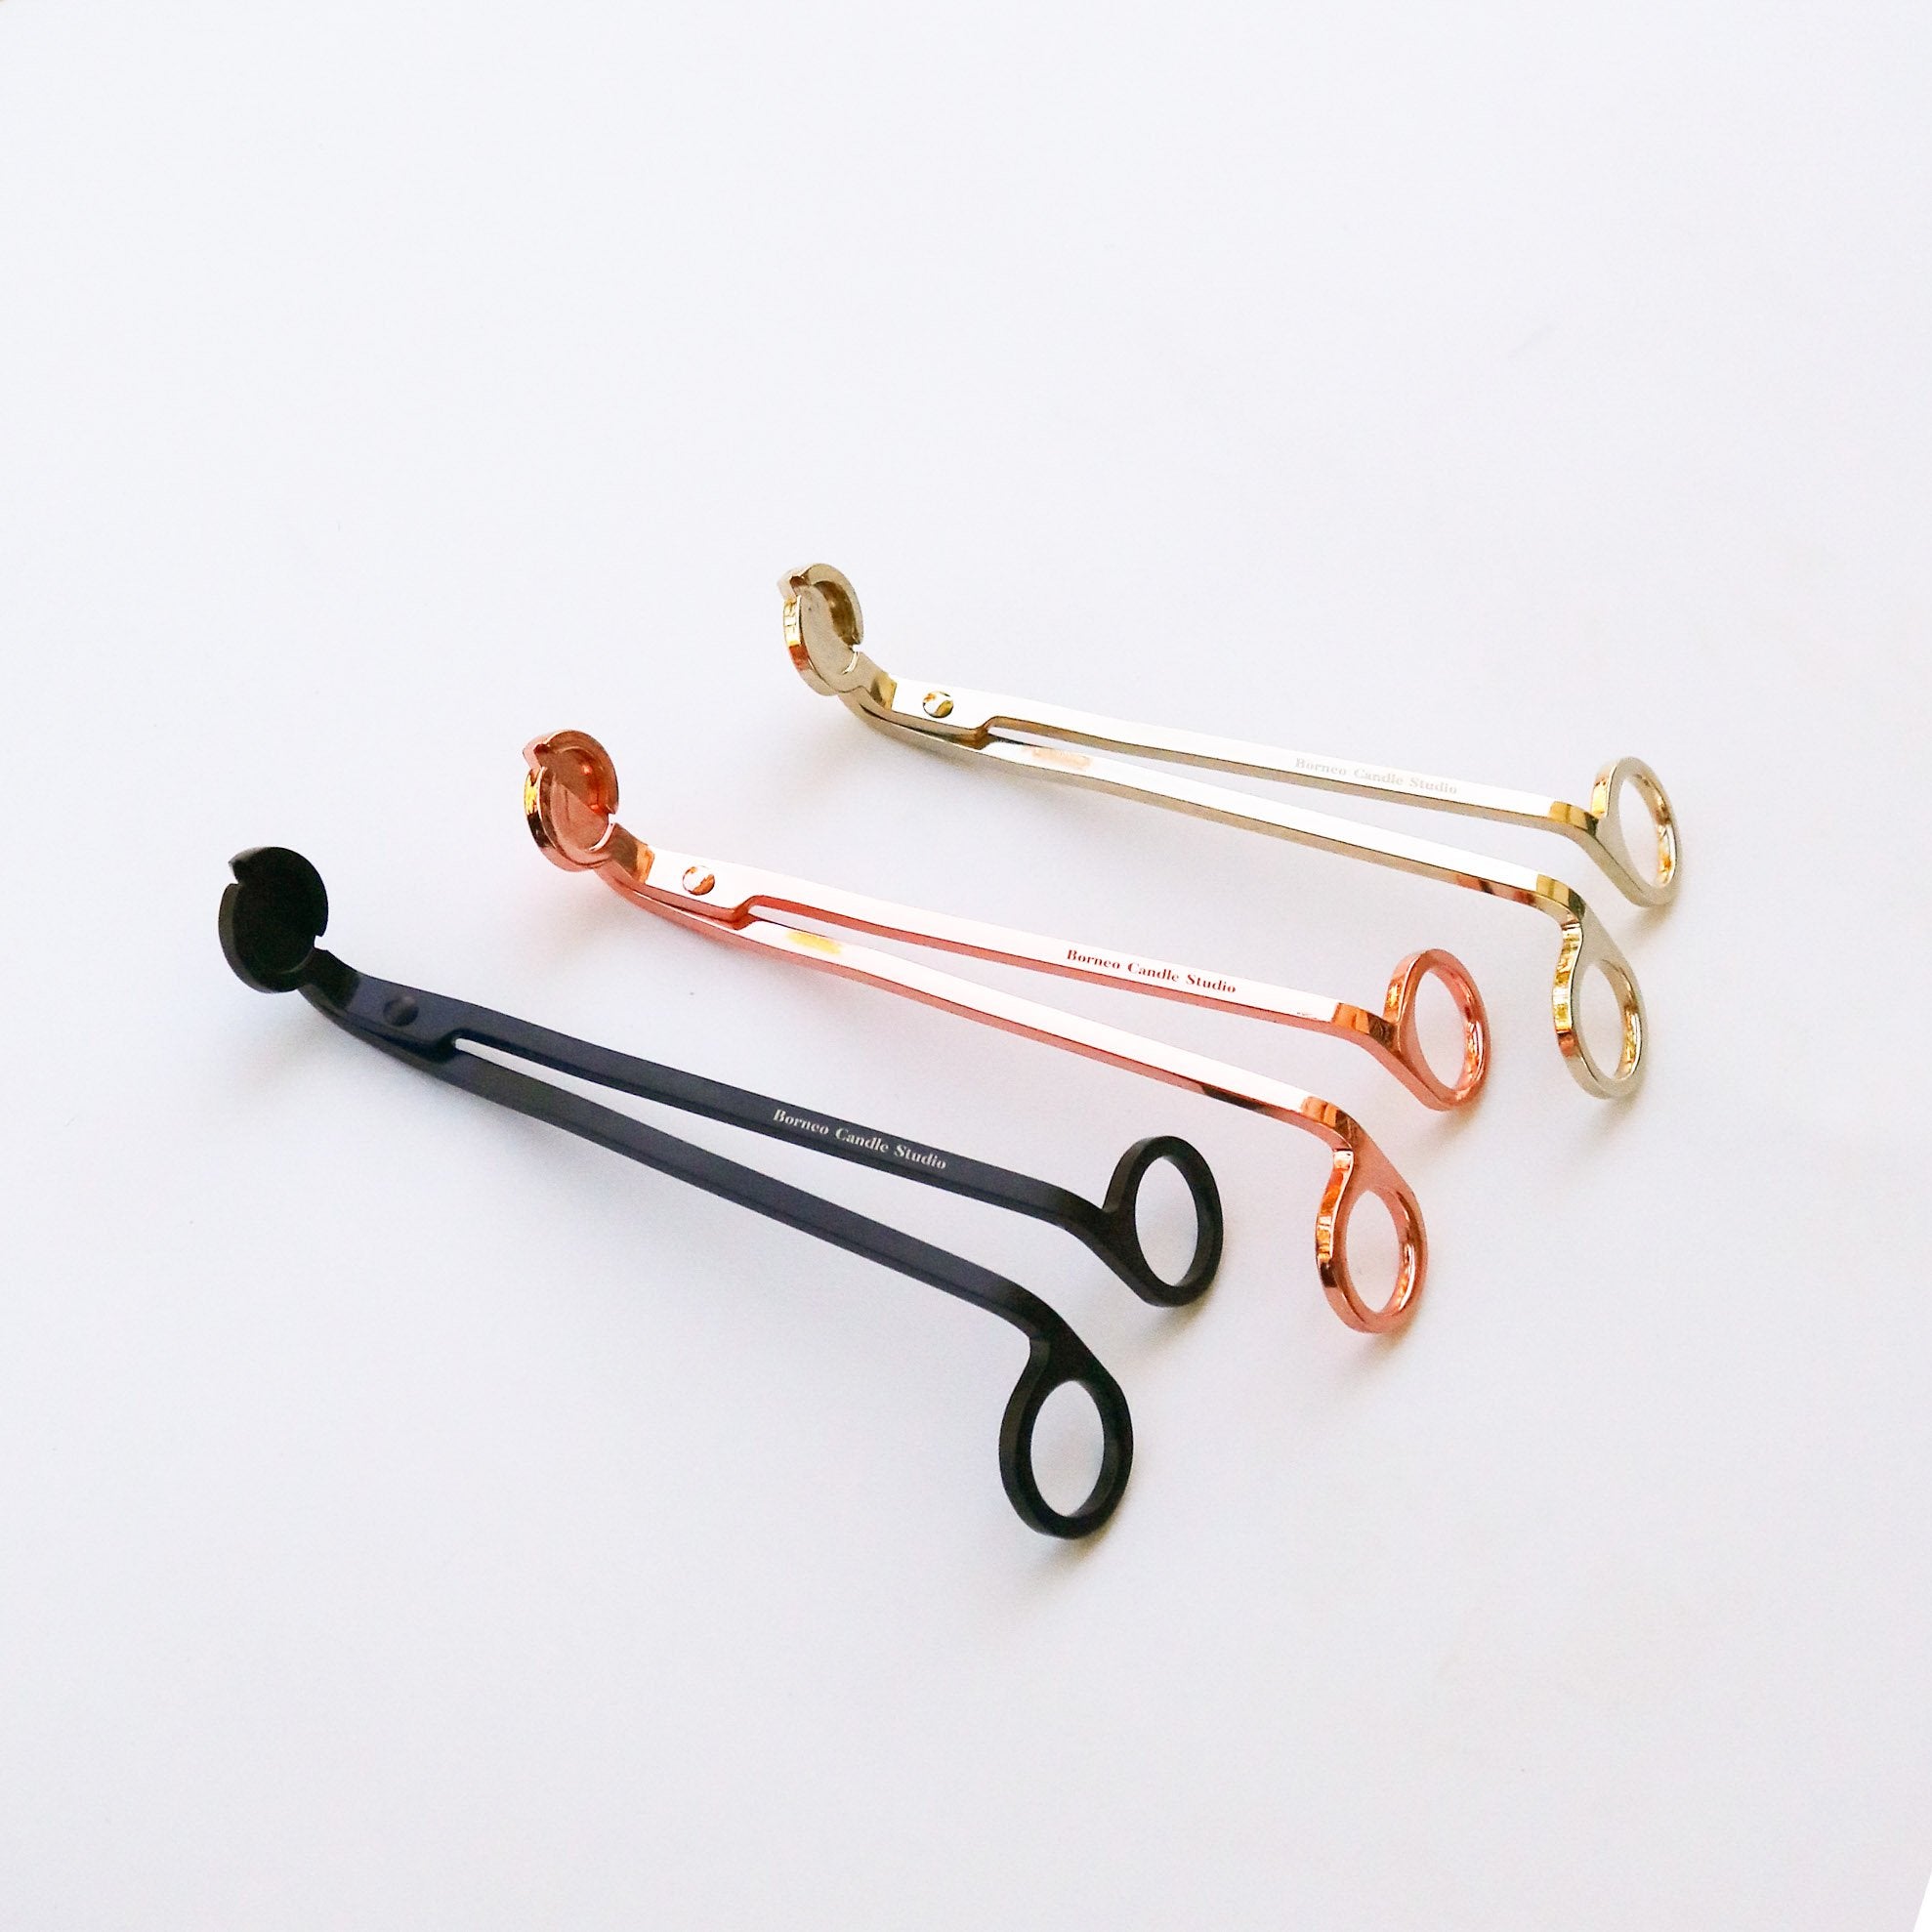 Candle Wick Trimmer Candle Accessories by Borneo Candle Studio in rose gold, gold and black